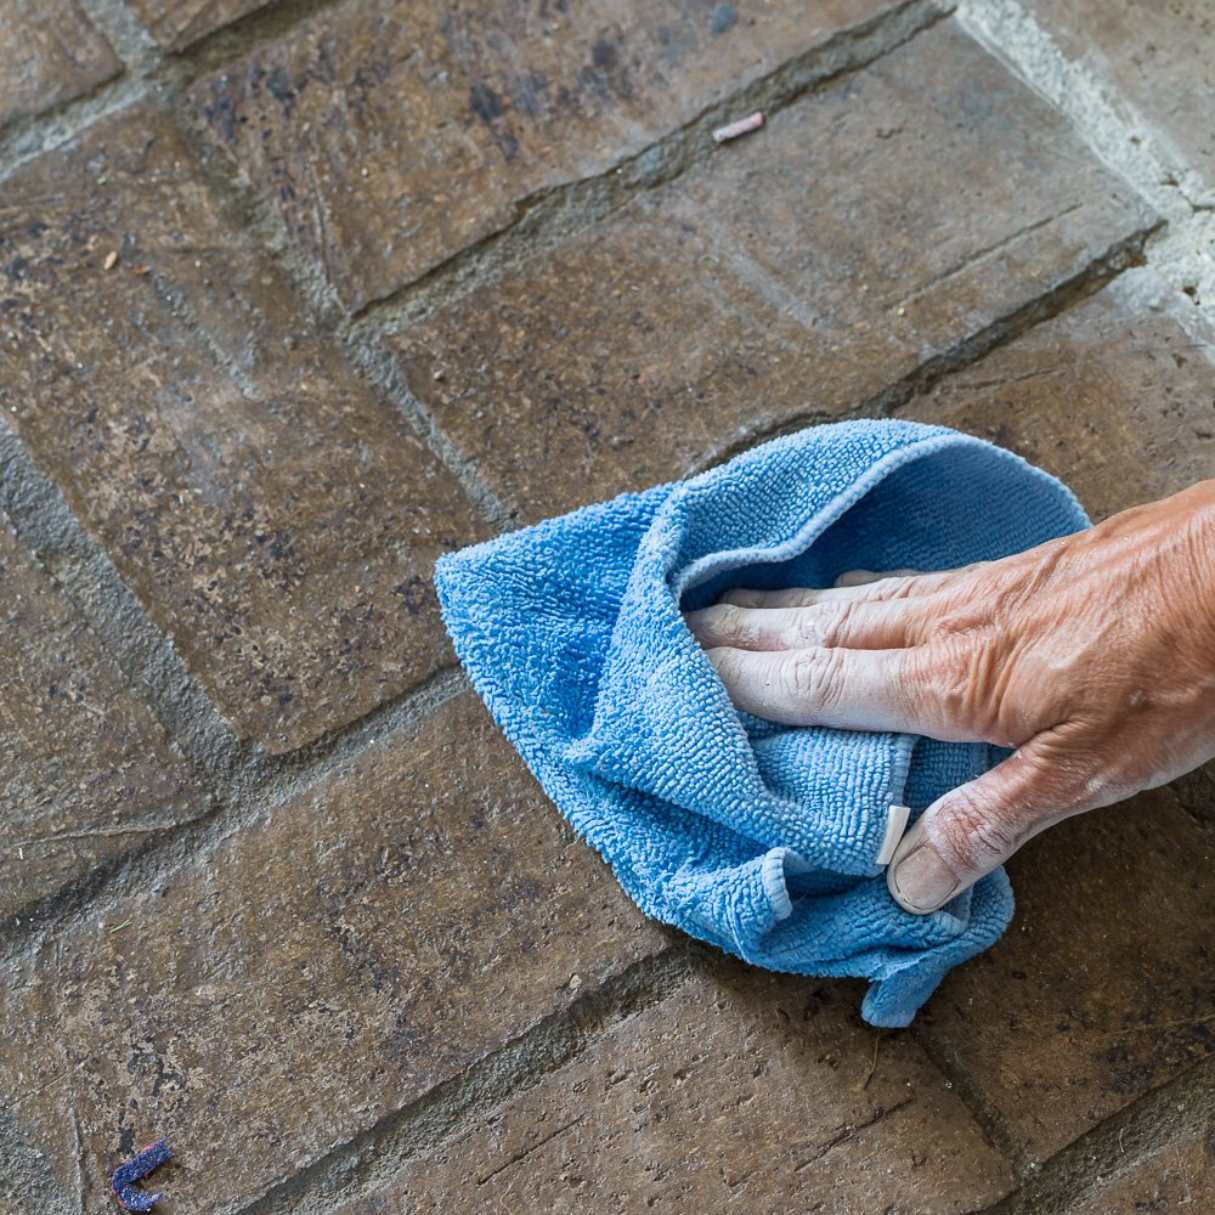 How To Clean A Brick Floor